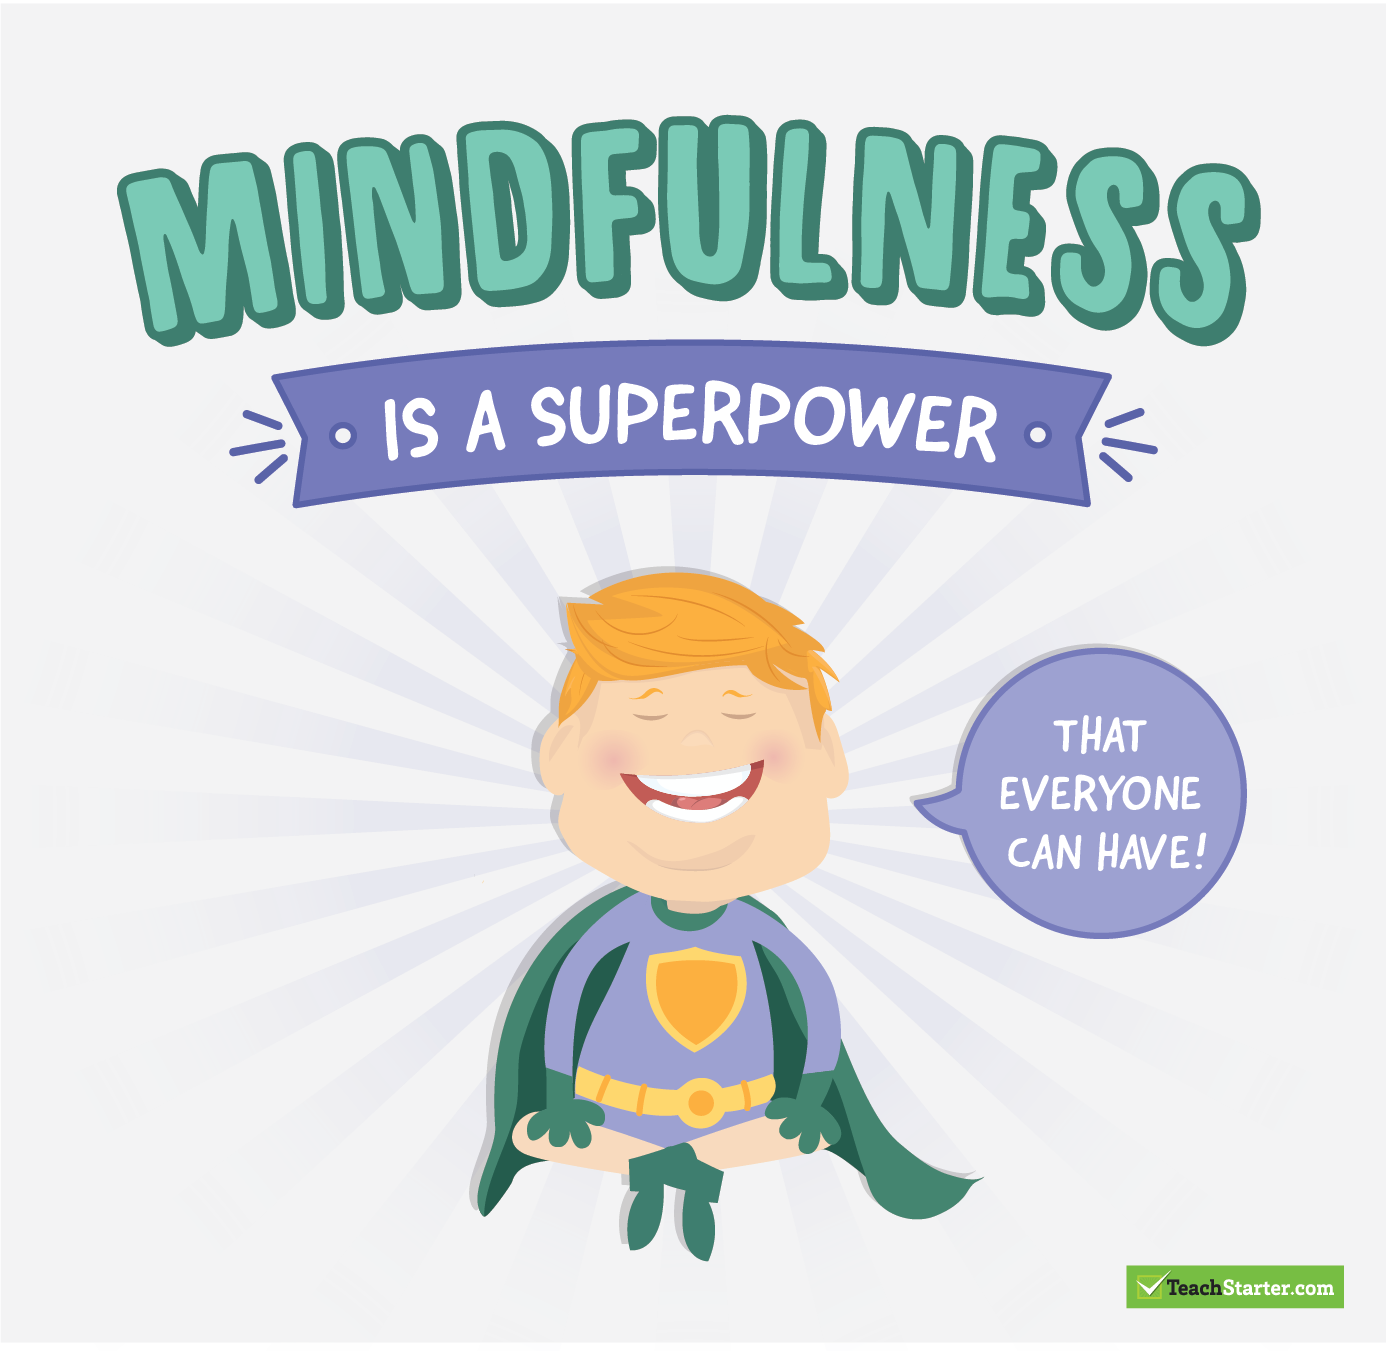 mindfulness is a superpower that everyone can have!